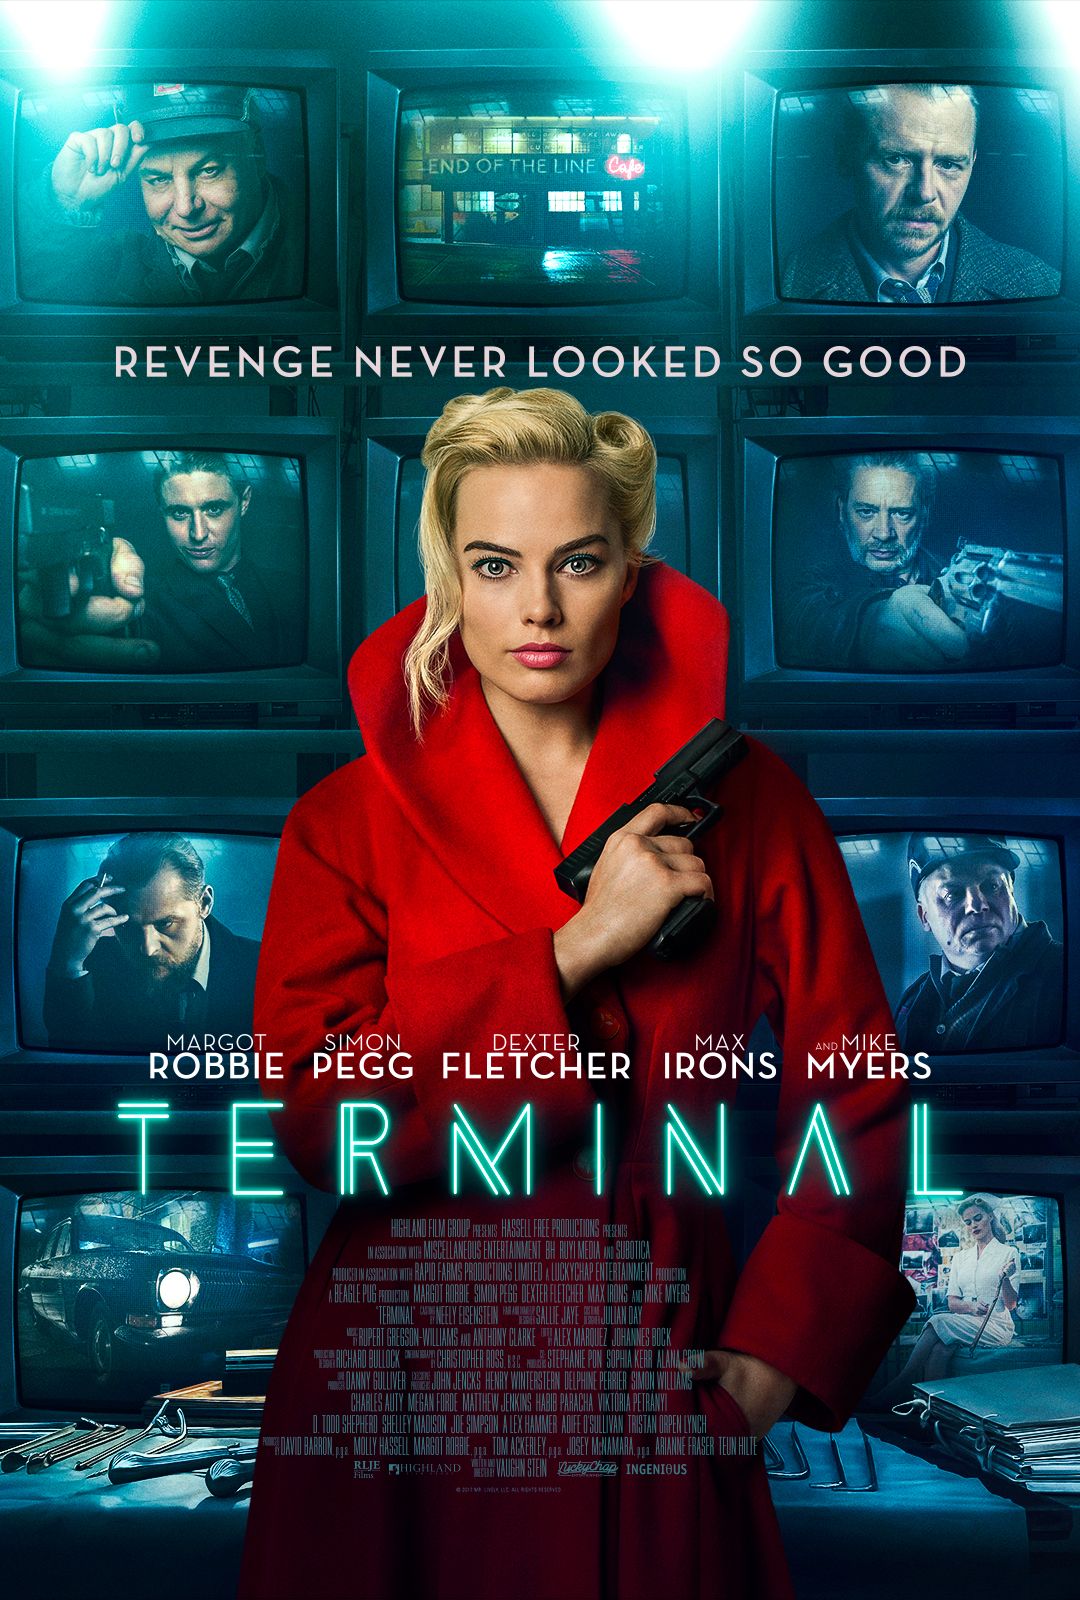 Margot Robbie Is a Femme Fatale in the First Terminal Posters | Collider1080 x 1600